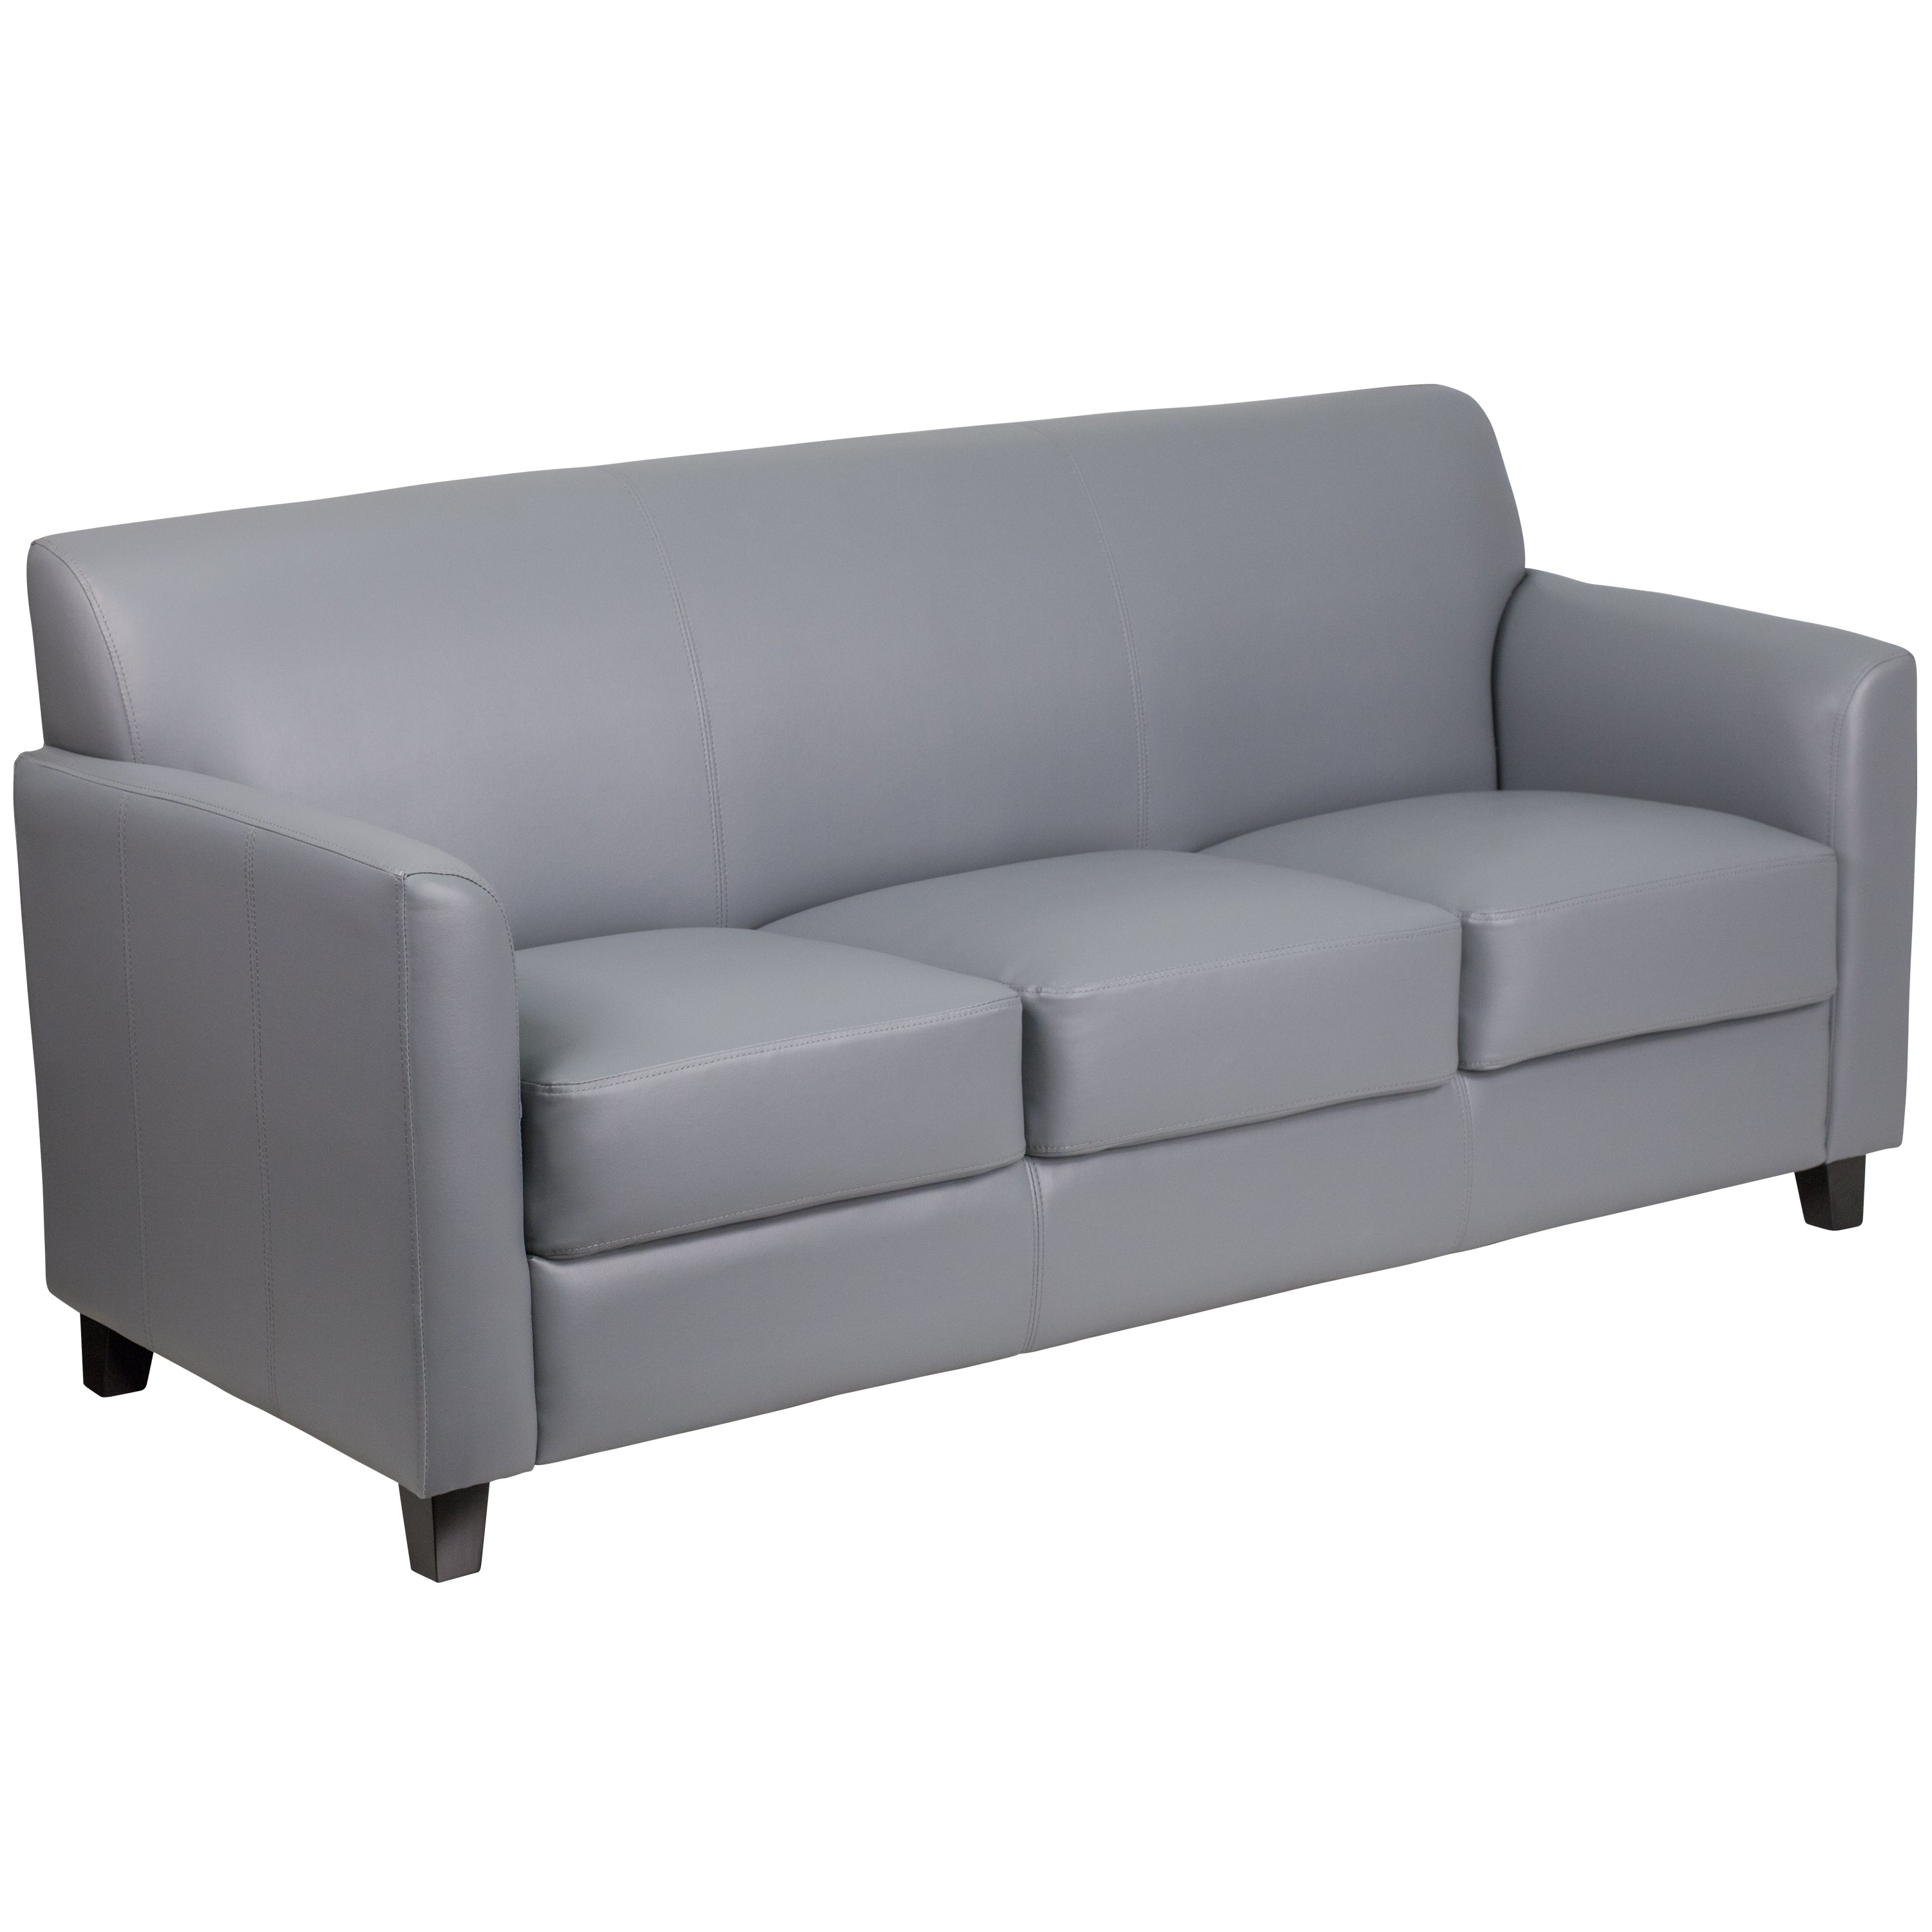 HERCULES Diplomat Series LeatherSoft Sofa with Clean Line Stitched Frame-Reception Sofa-Flash Furniture-Wall2Wall Furnishings